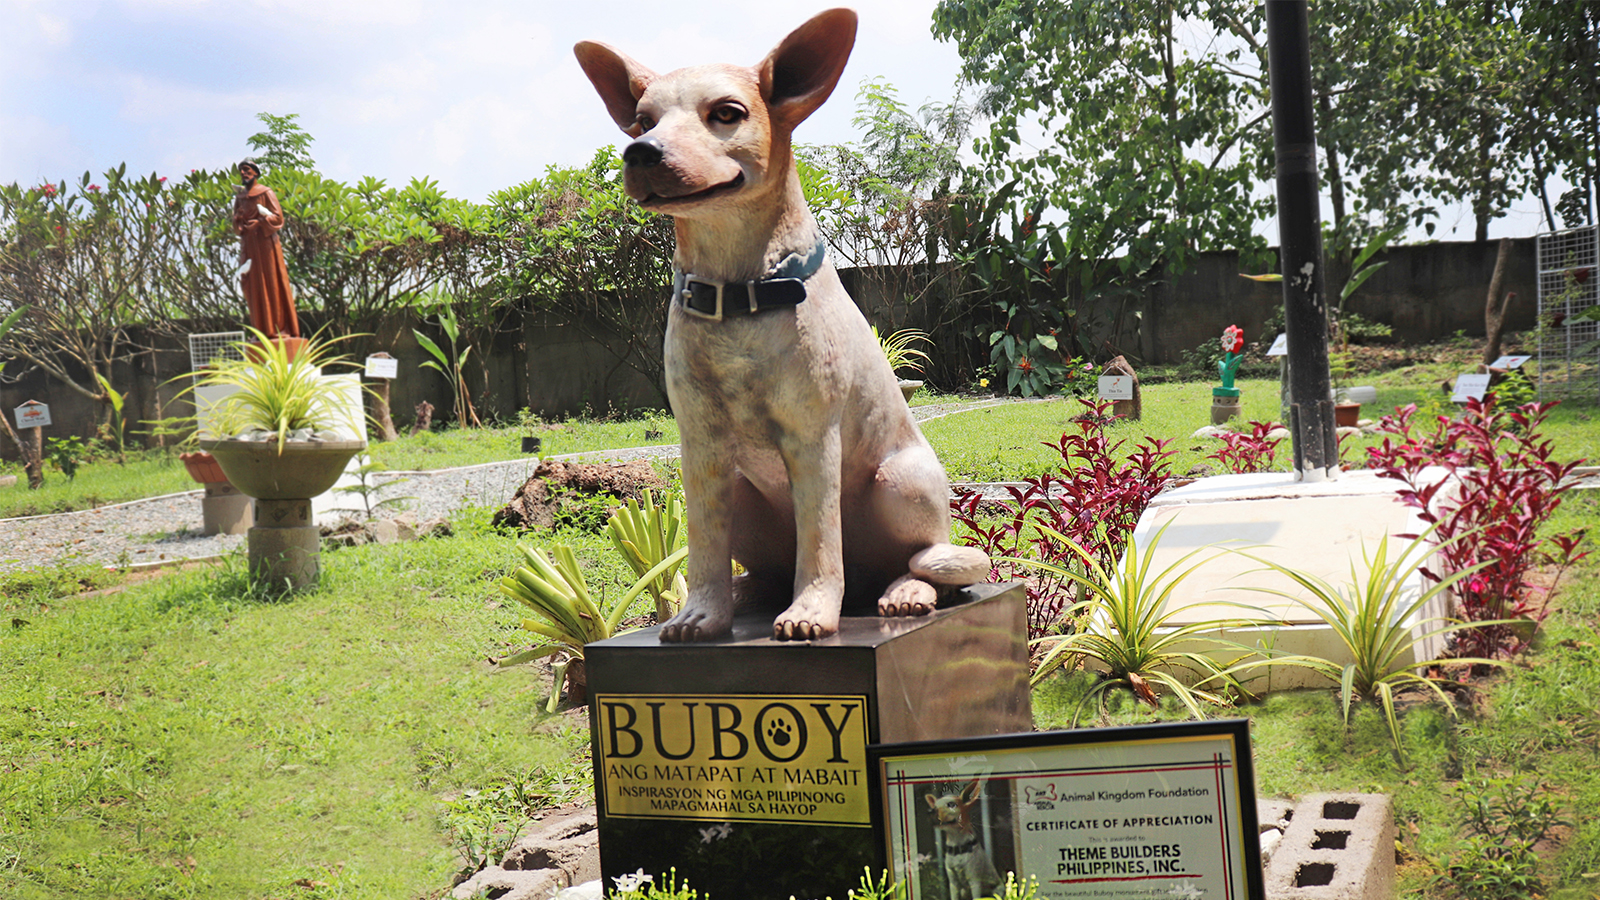 Themebuilders Philippines design and build "Buboy" statue donated to Animal Kingdom Foundation